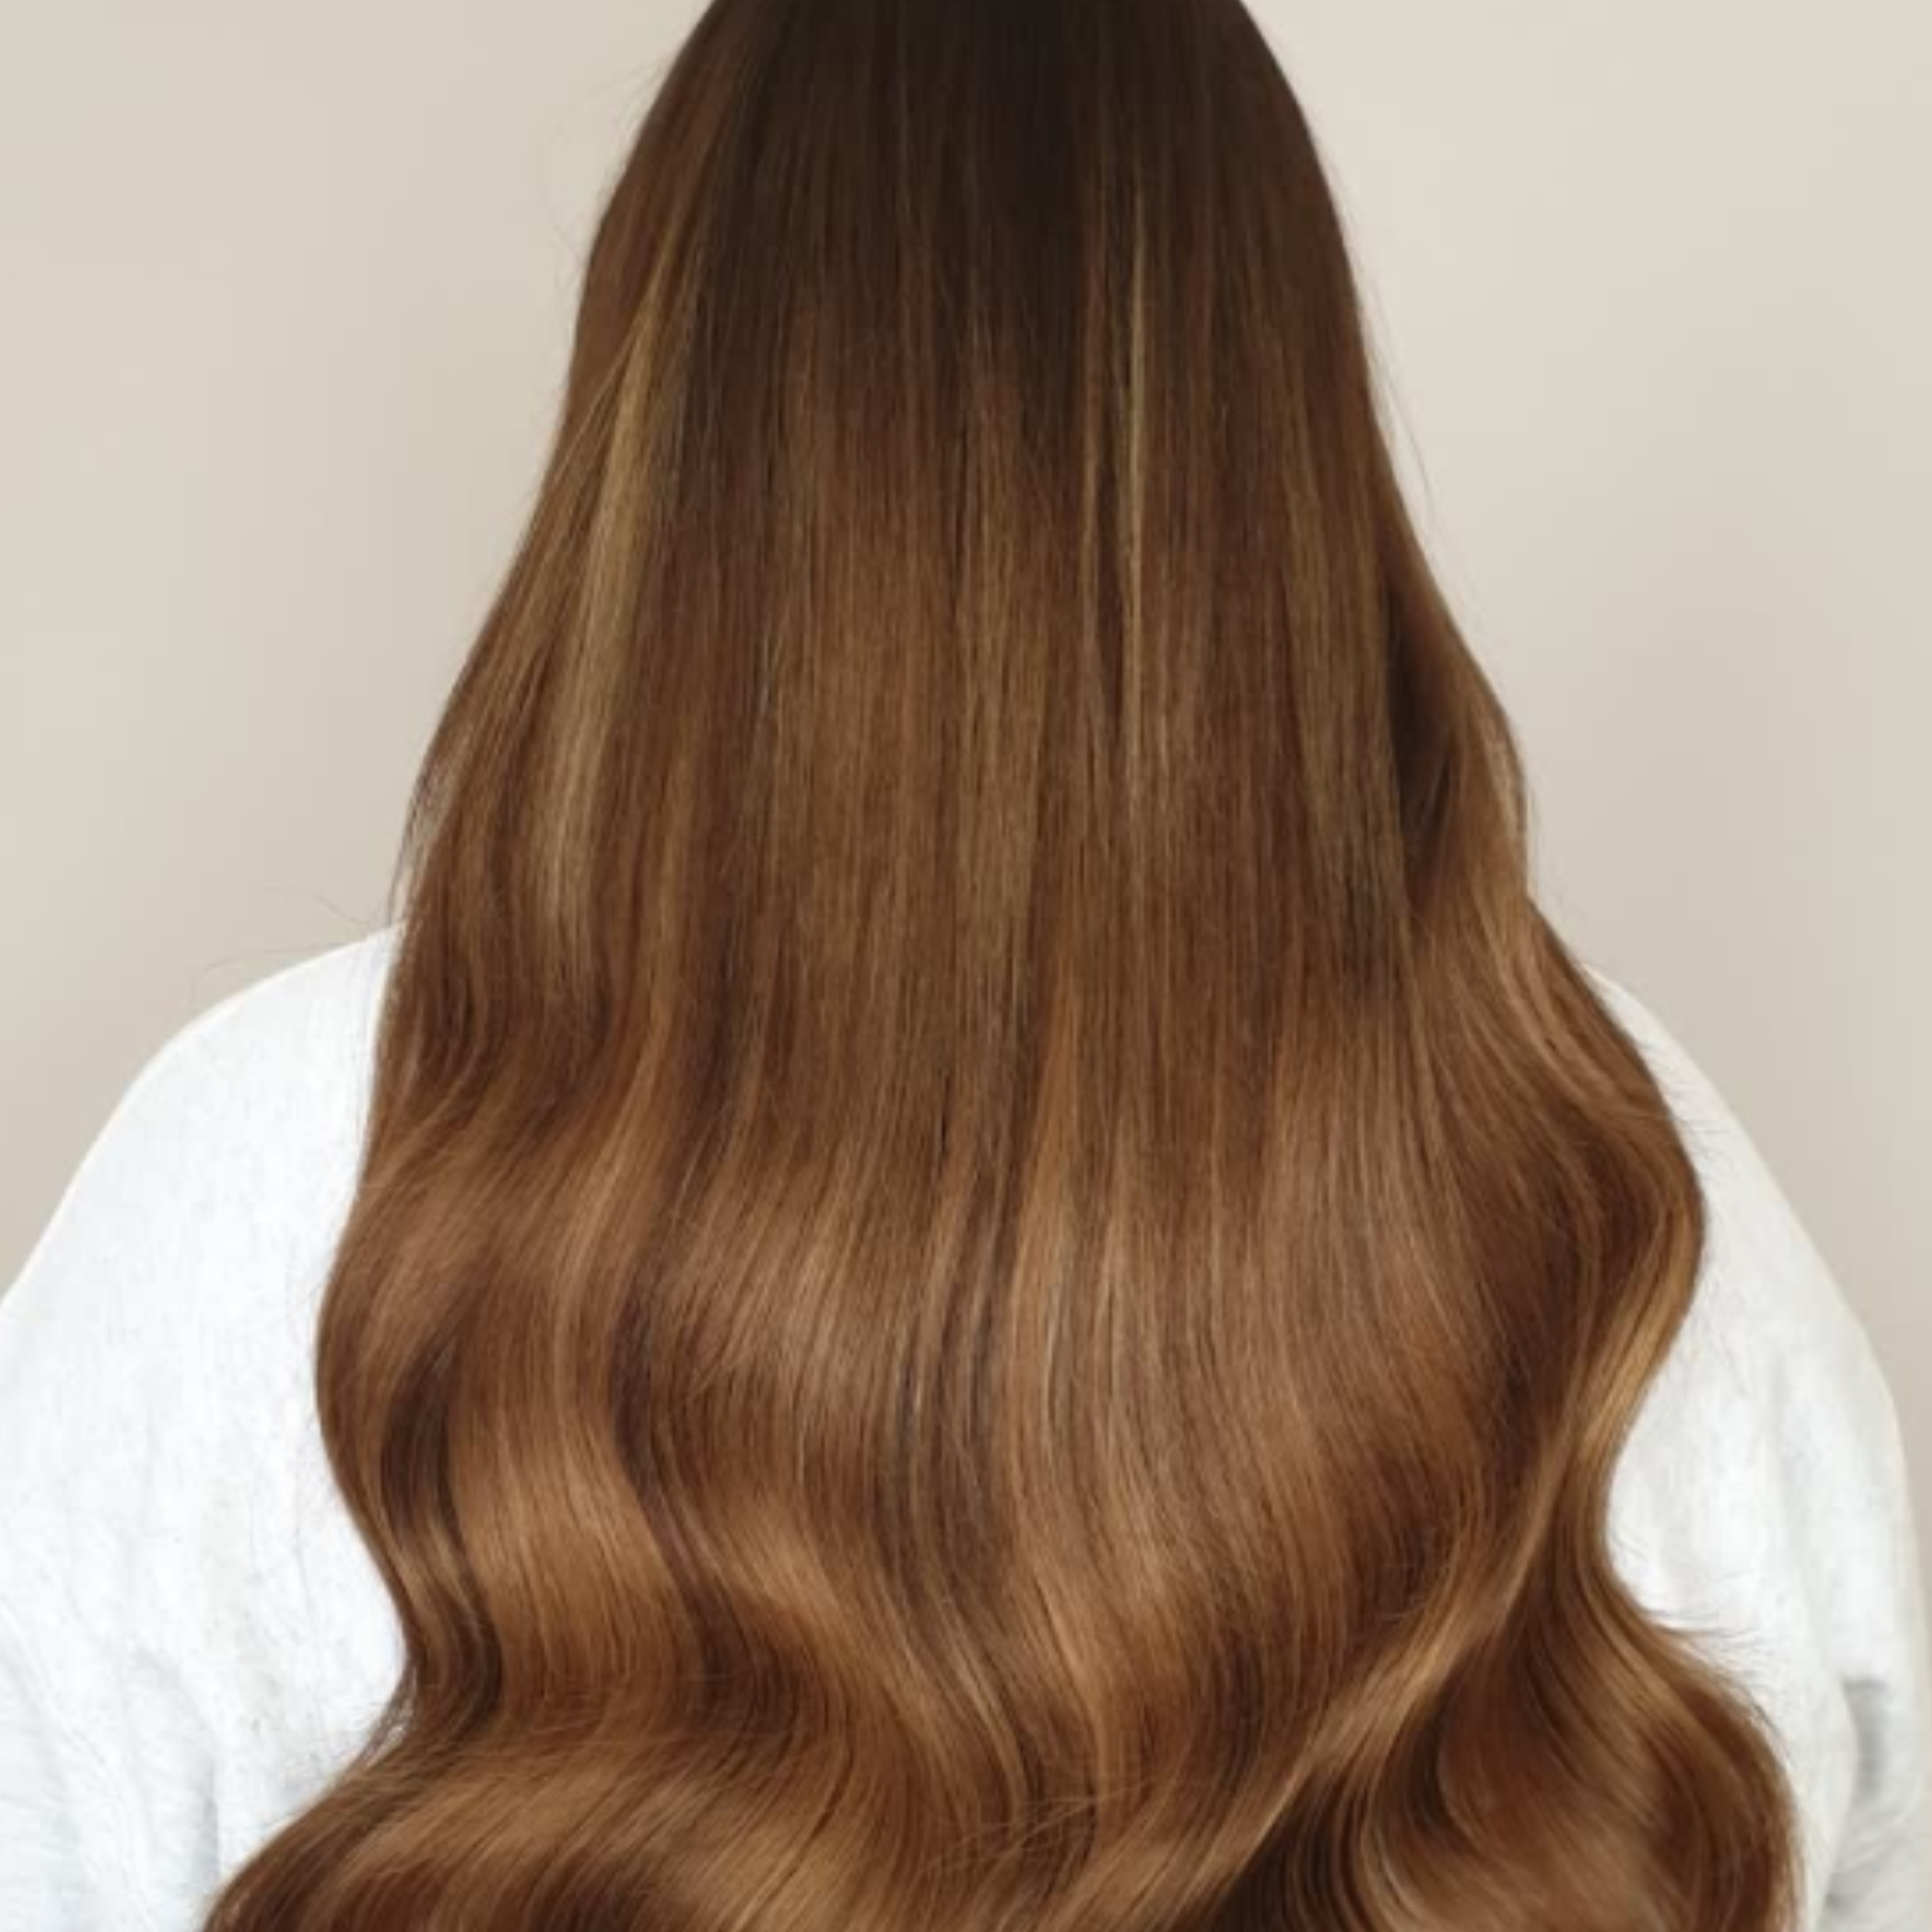 "hair rehab london 22" weft hair extensions shade swatch titled gorgeous gossip"